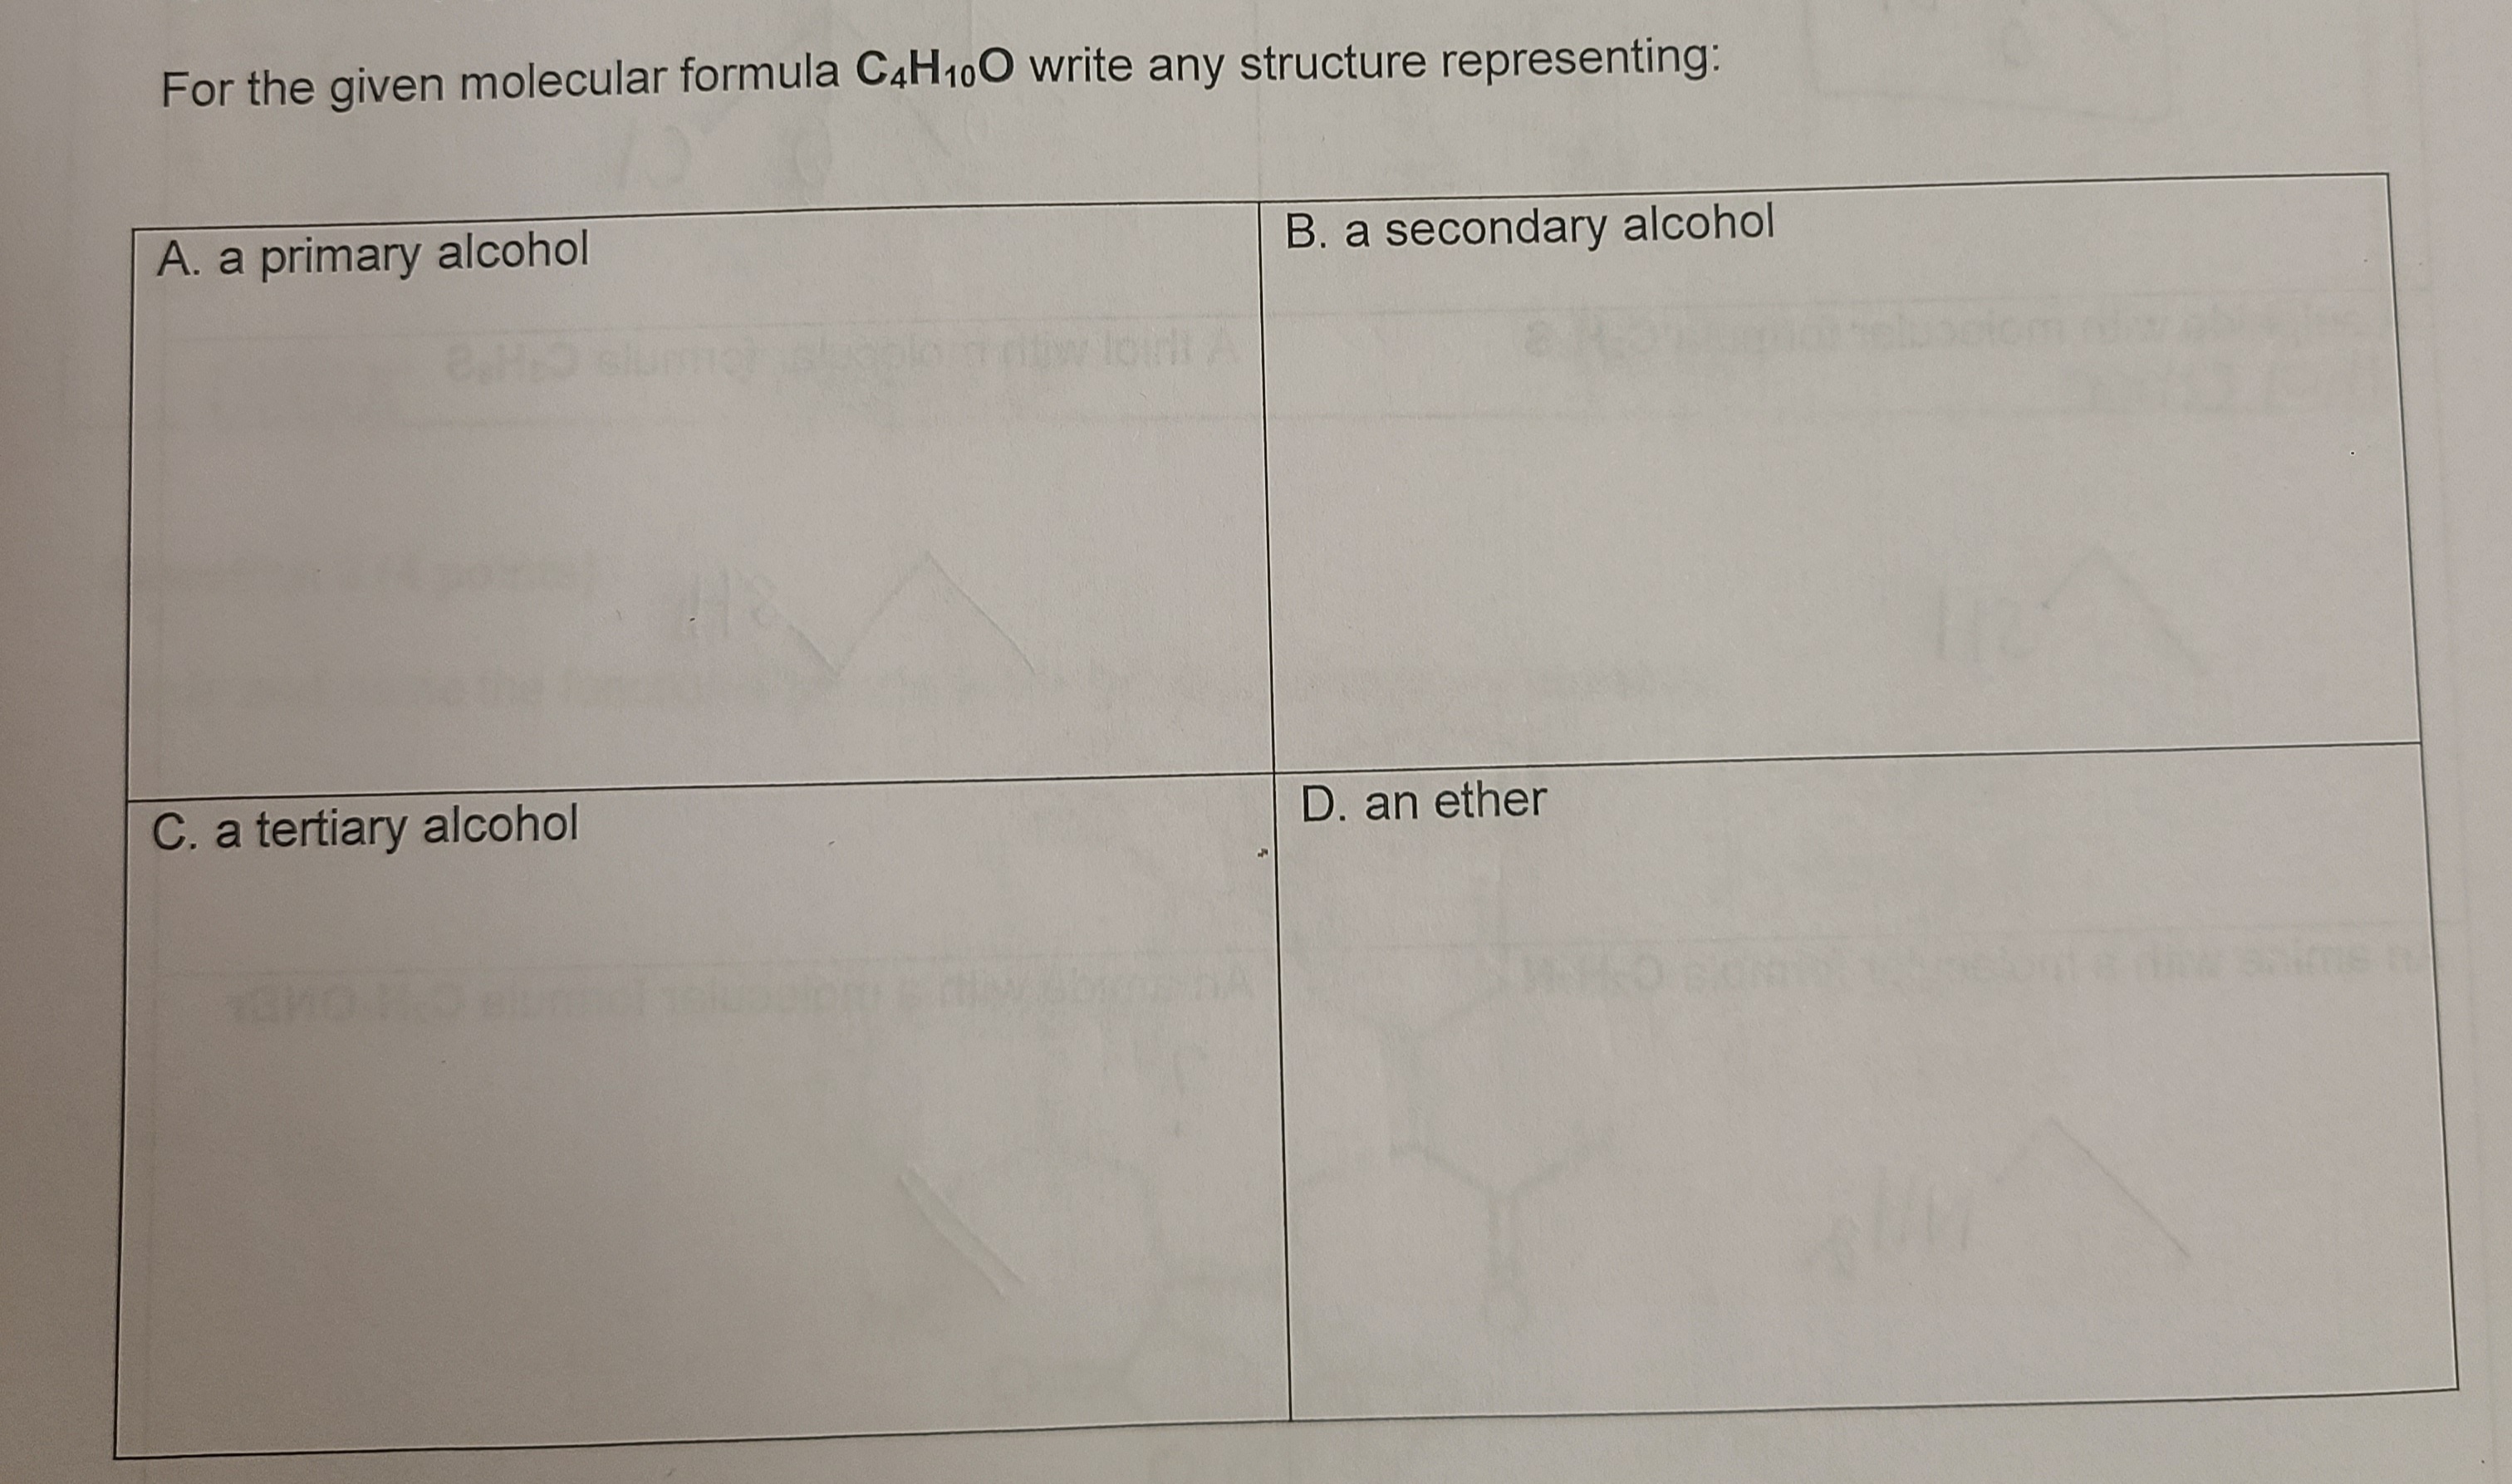 For the given molecular formula C4H100 write any structure representing:
A. a primary alcohol
B. a secondary alcohol
wloint A
C. a tertiary alcohol
D. an ether
